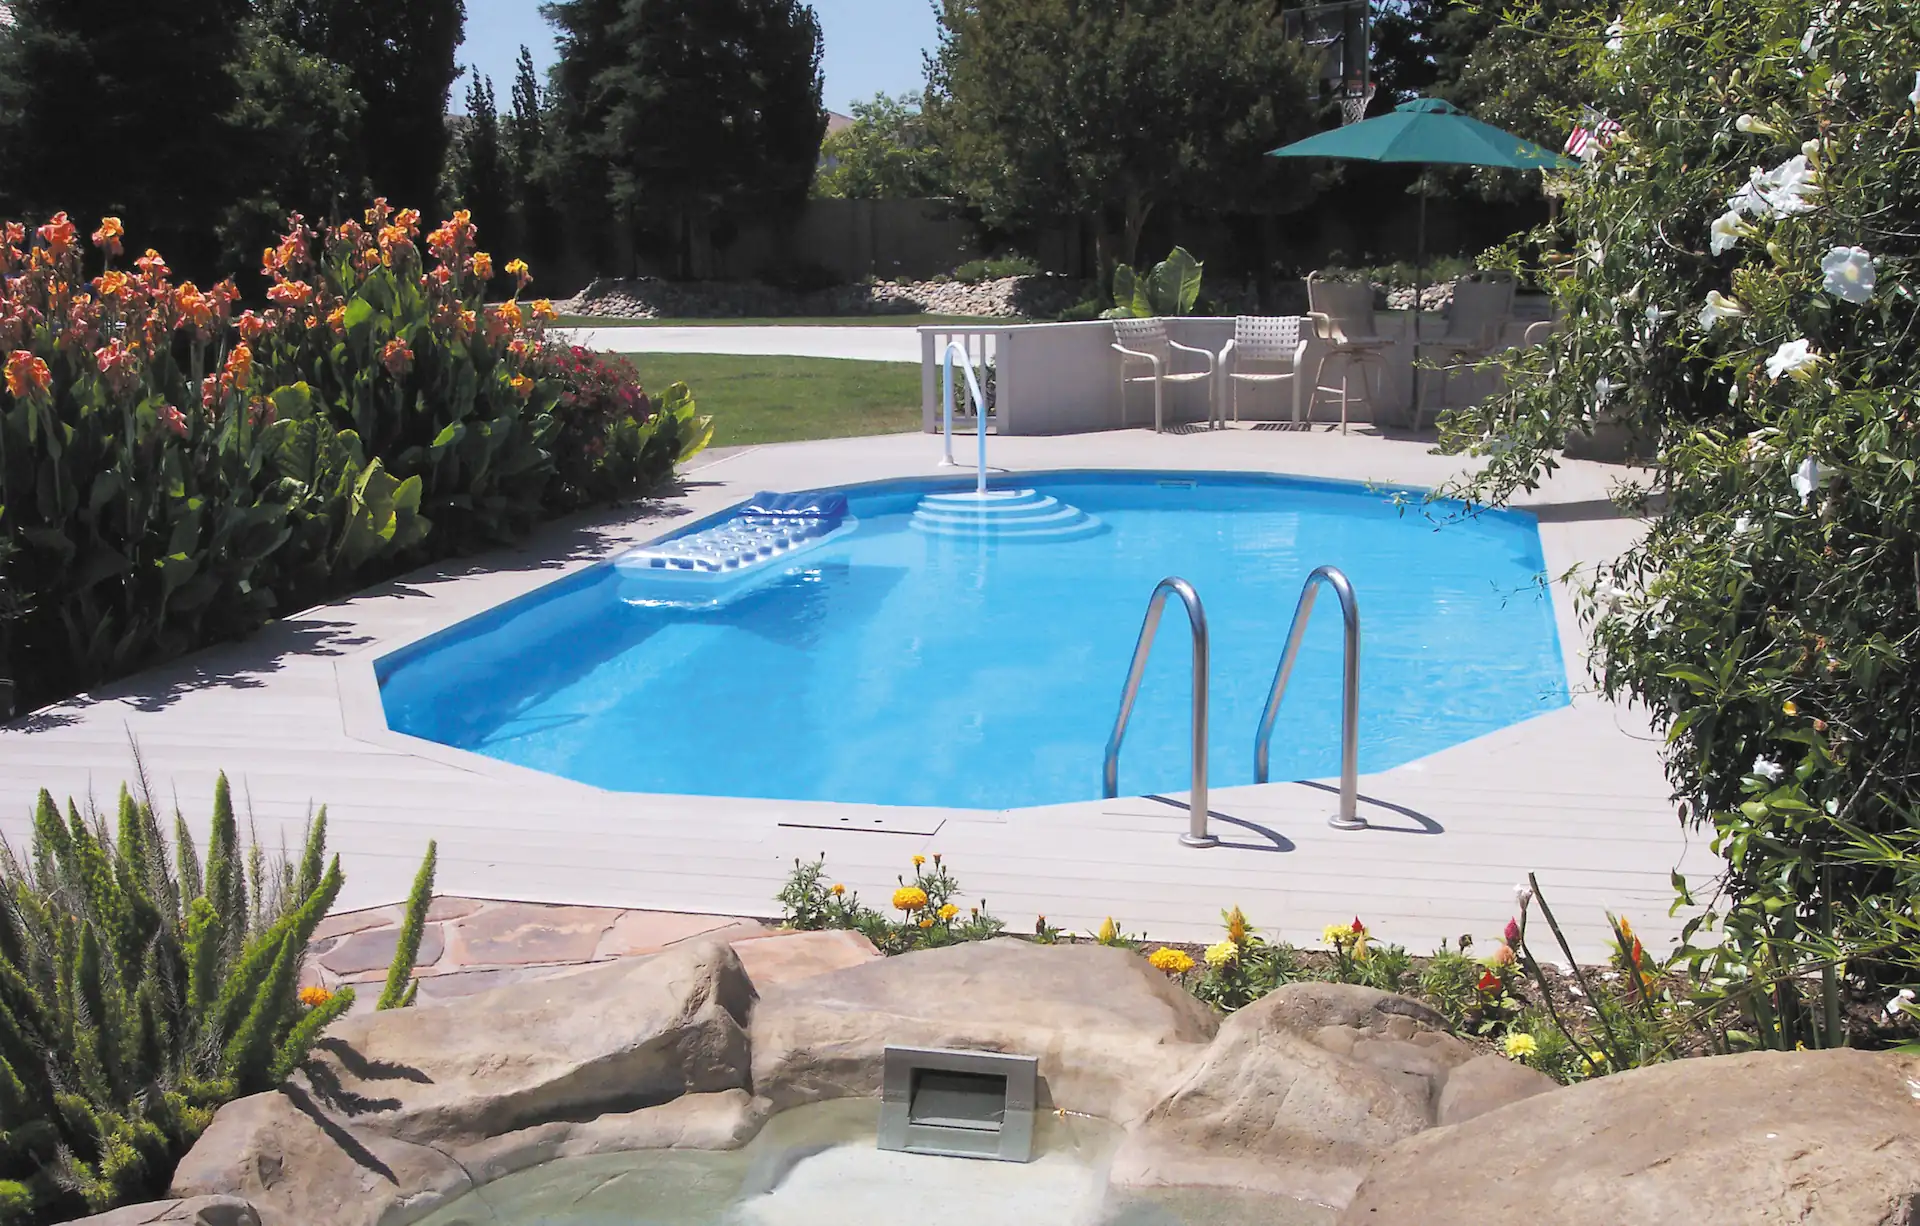 An oval Doughboy Pool is fully recessed in the ground and surrounded by an elegant pool surround. Doughboy's above-ground pools are unique in that they are strong enough for a fully-recessed pool installation.